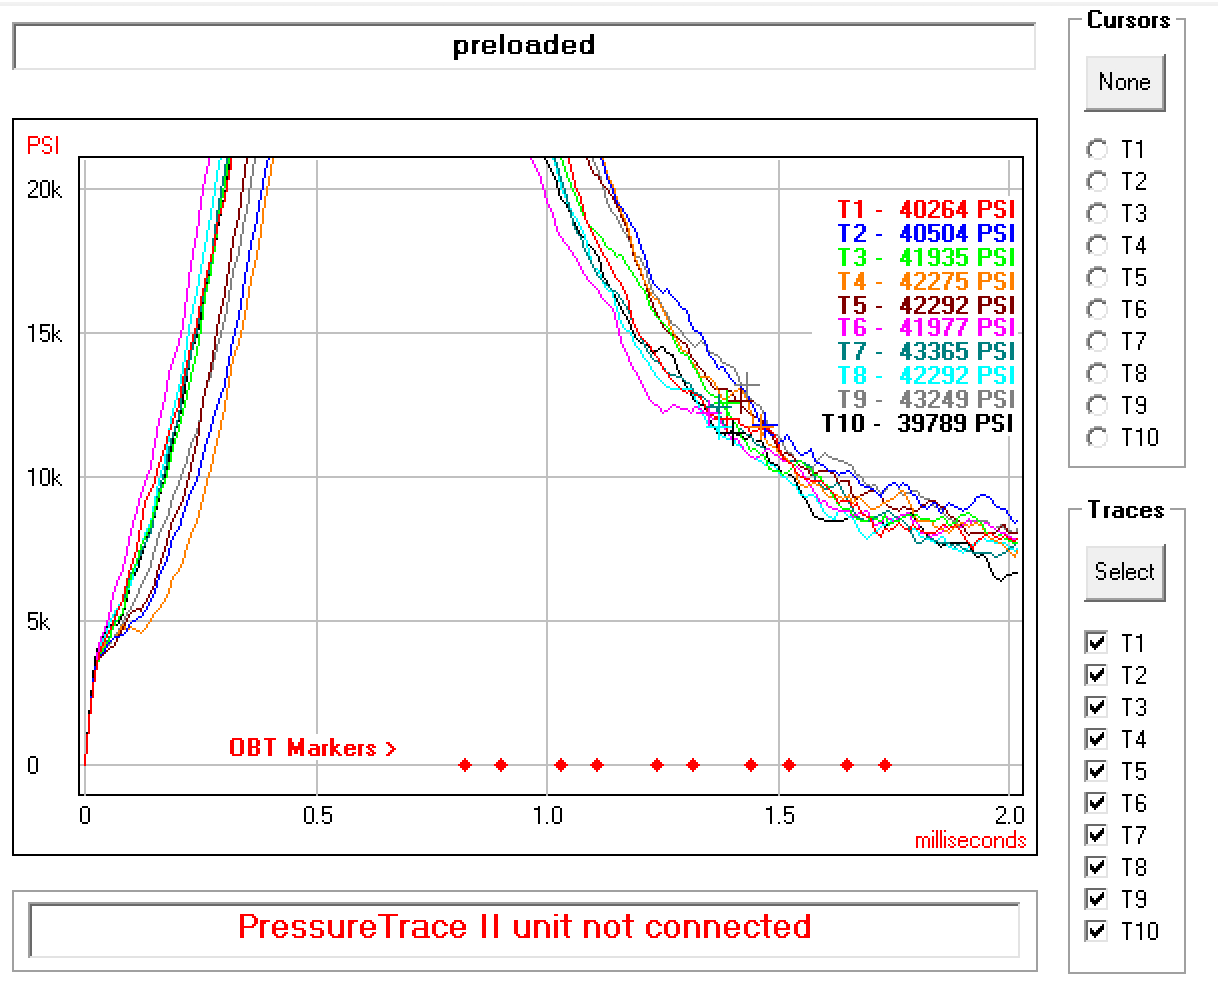 Pressure Trace II screenshot for the Preloaded Bipod string. Barrel exit time marked with ＋.